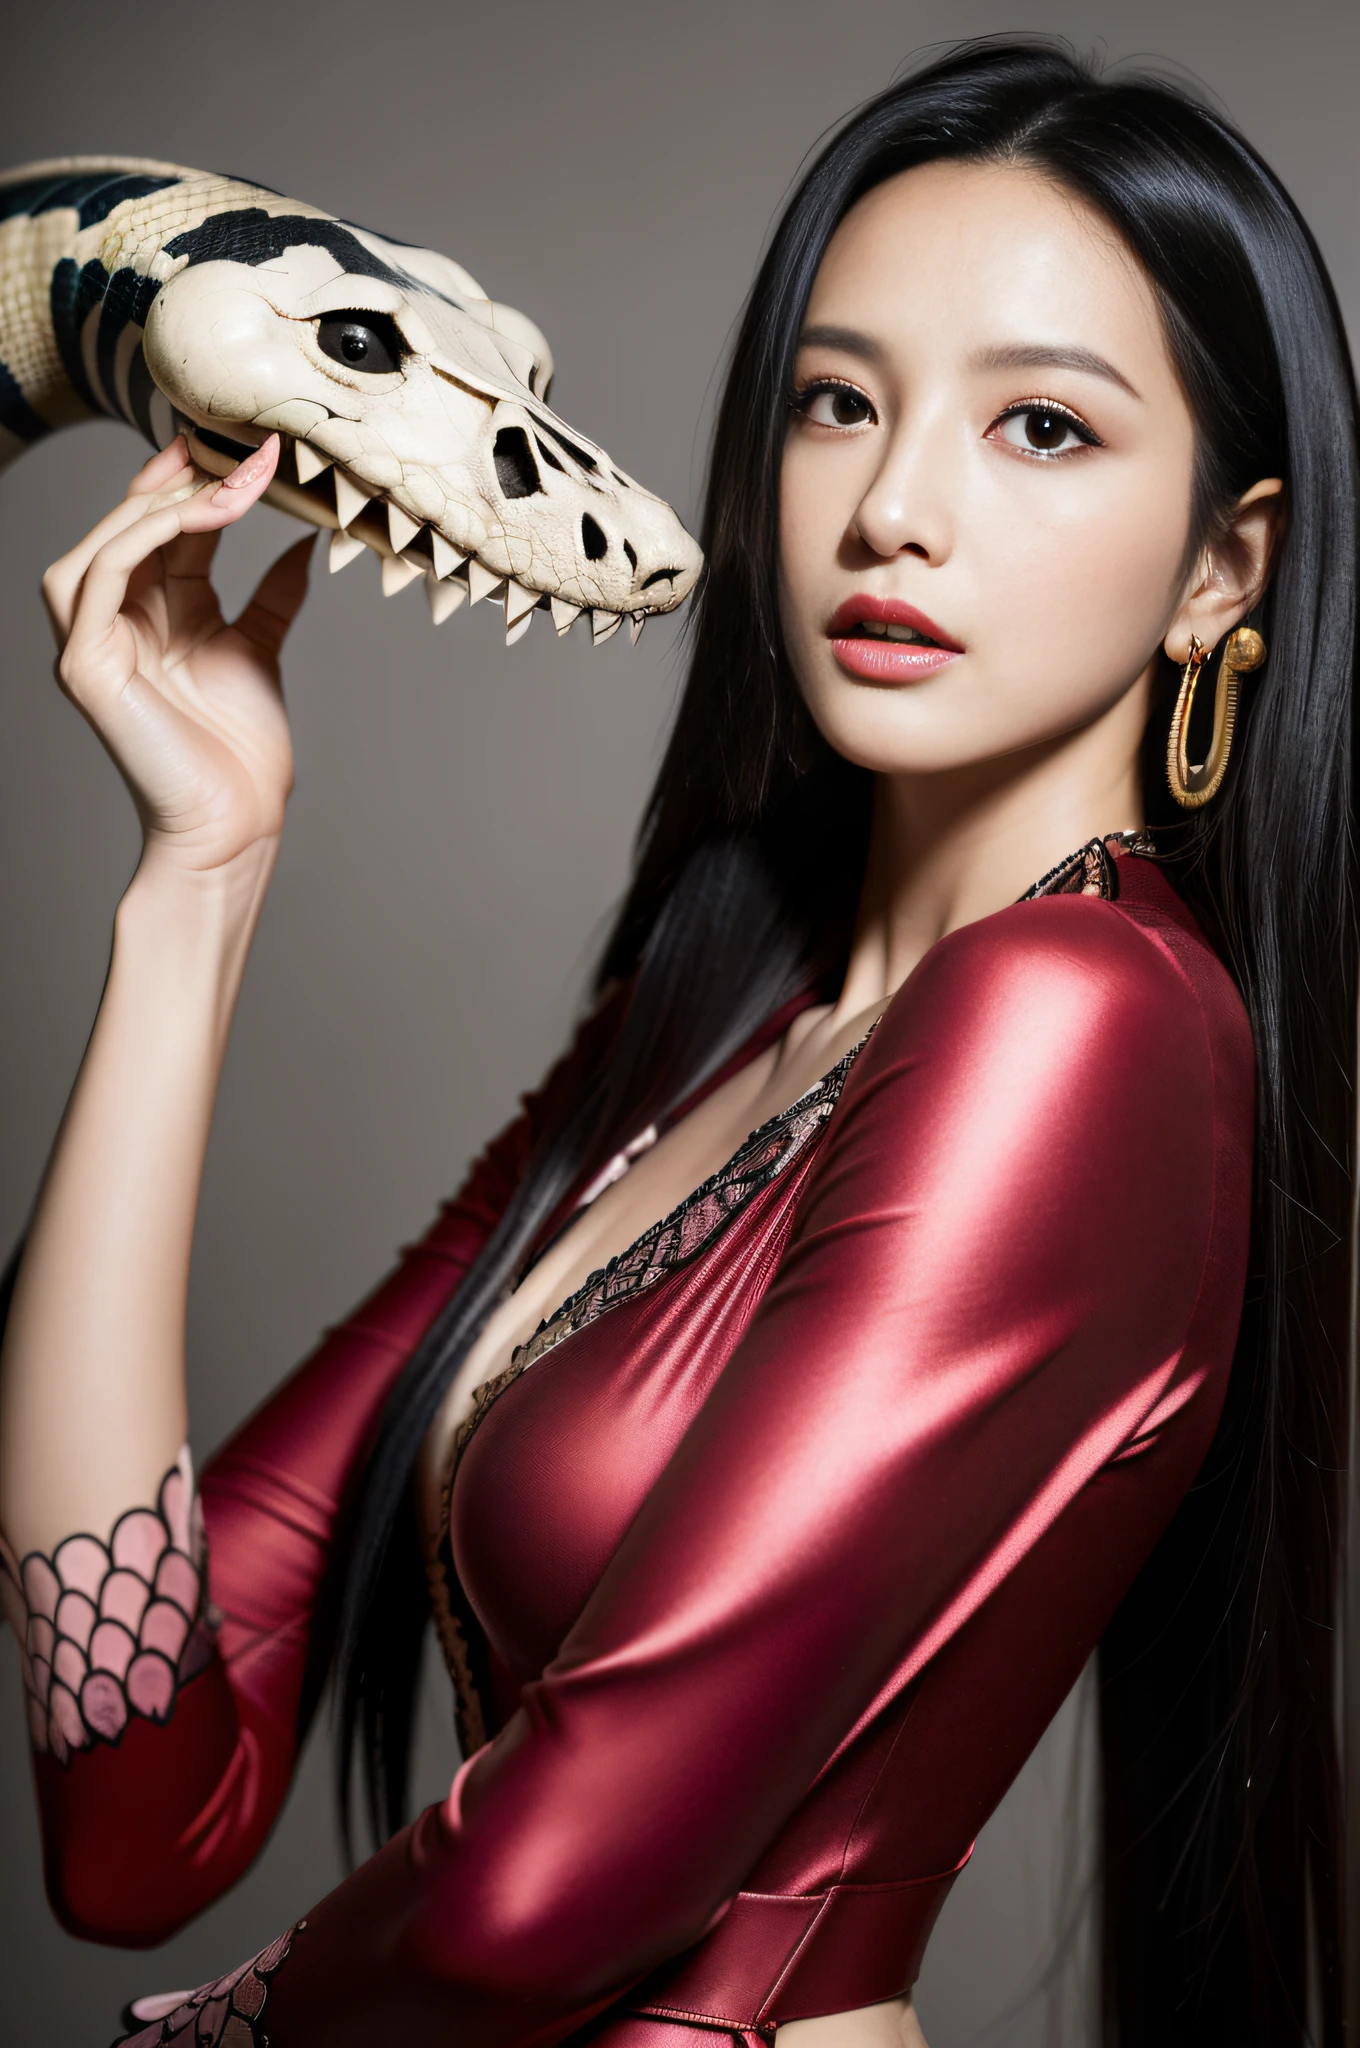 (((masterpiece+best quality+high resolution+ultra-detailed))), boa hancock, long silky black hair, high nose, sharp eyes, noble and inviolable temperament, (([female]: 1.2 + [beauty]: 1.2 + black long hair: 1.2)), snake_skull background, bright eyes, dynamic angle and posture.